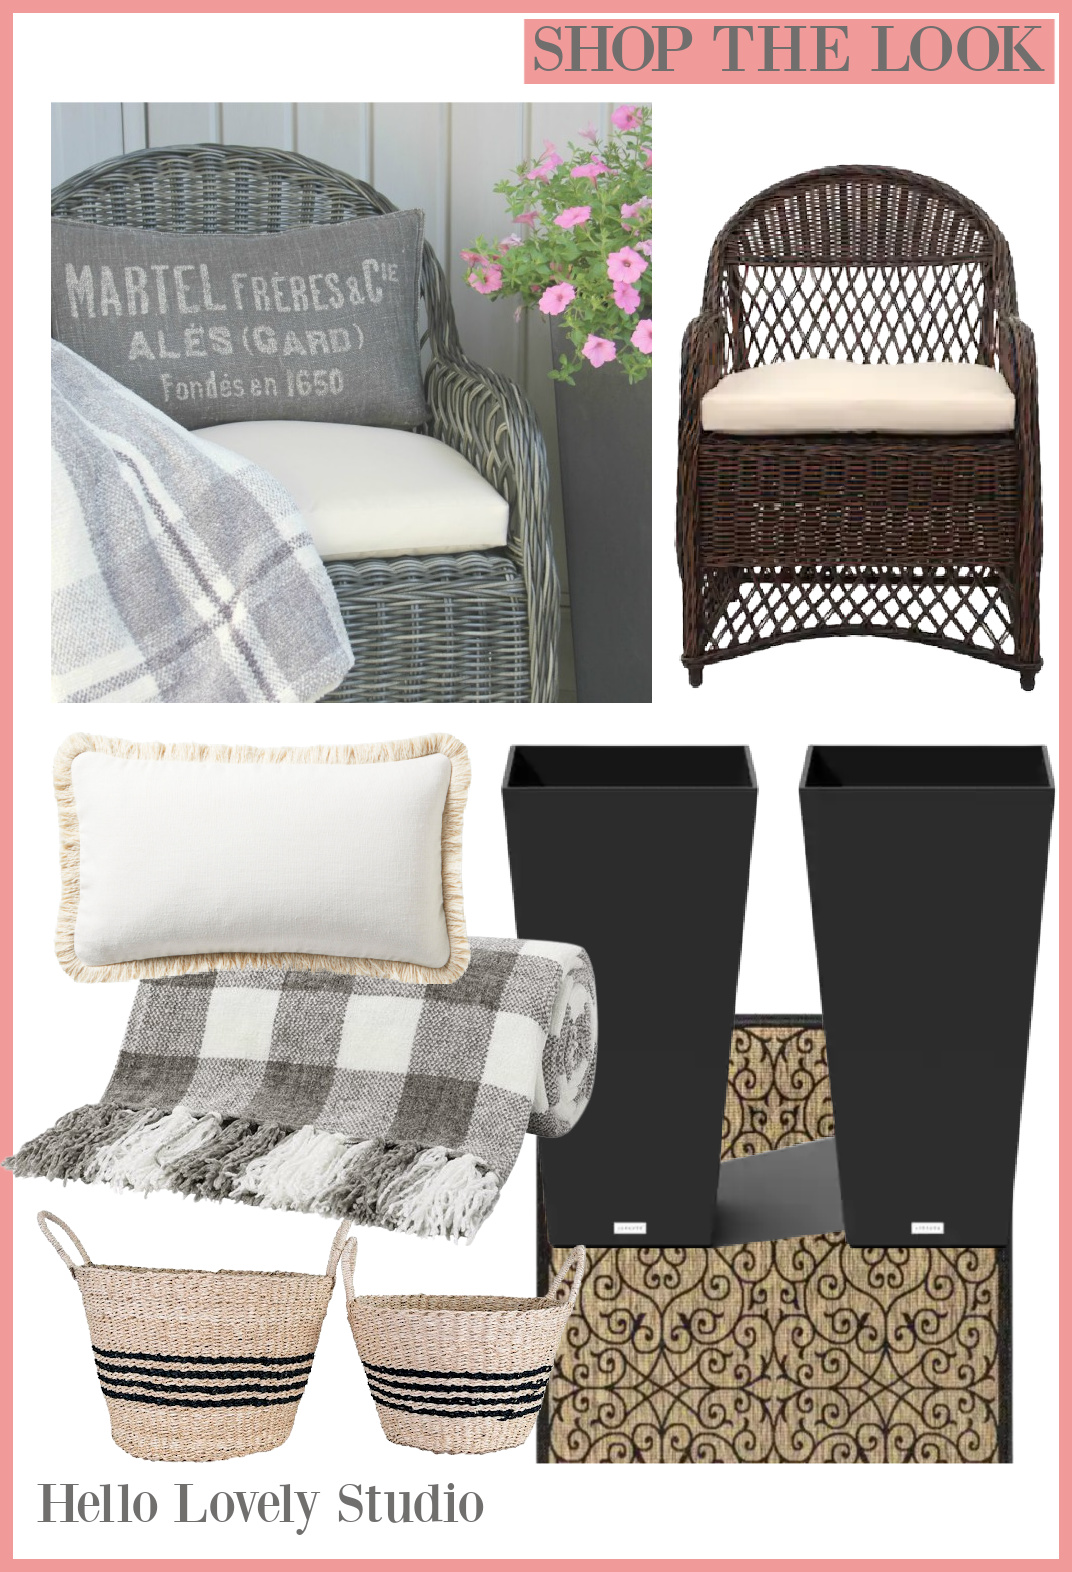 European Country Porch Shop the Look - Hello Lovely. #frenchfarmhouse #porchdecor #getthelook